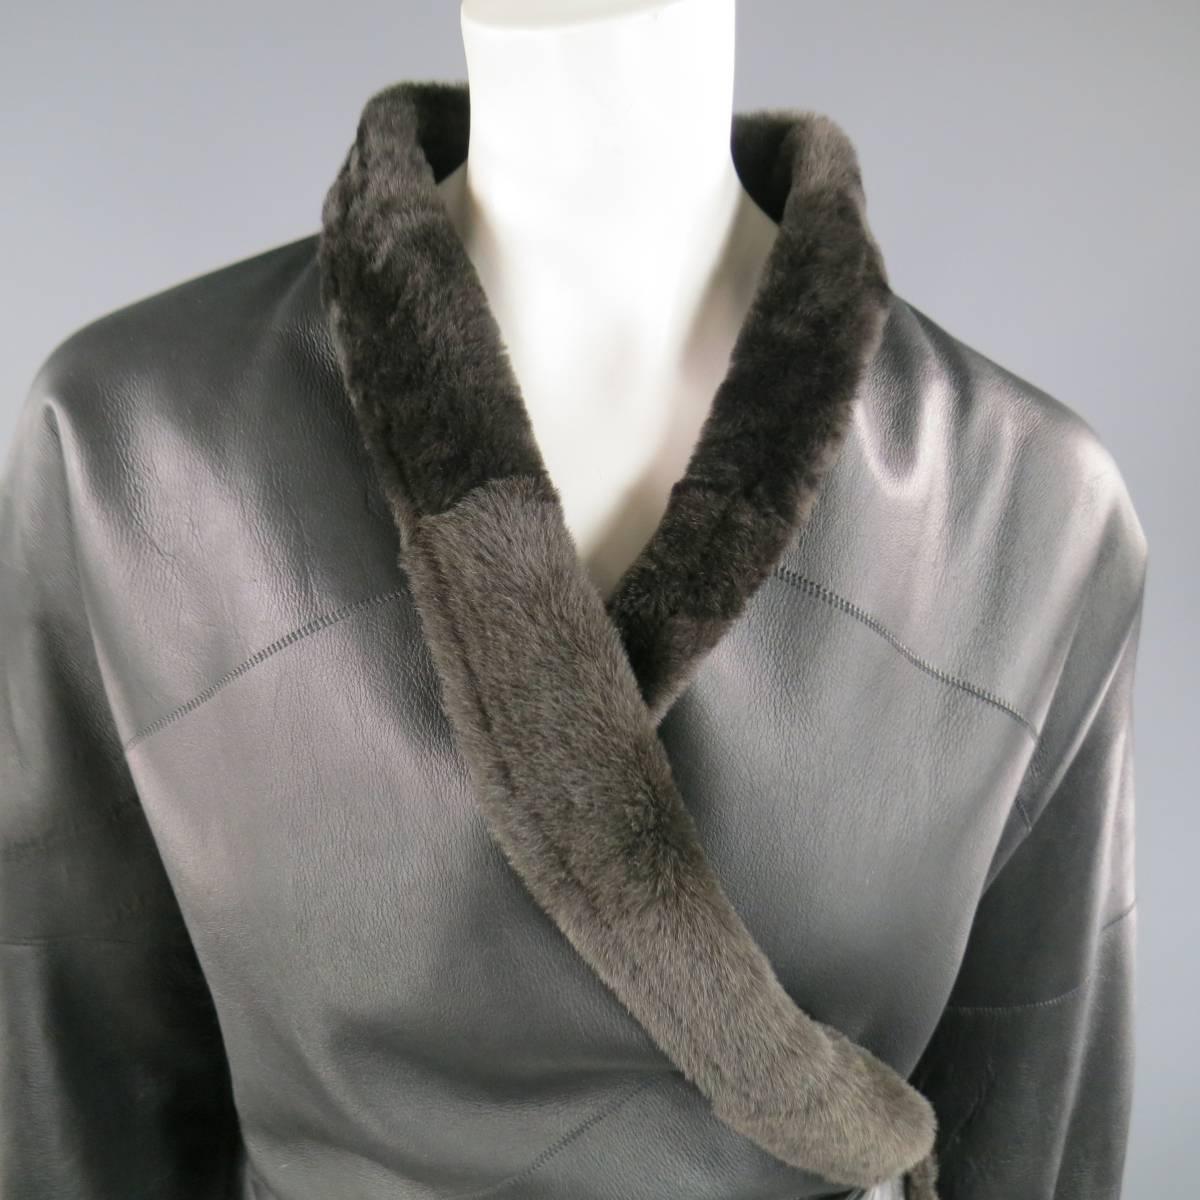 This fabulous MAX MARA jacket comes in black leather shearing with brown fur and features a band lapel, cuffed sleeves, and wrap and tie closure. Made in Italy.
 
Excellent Pre-Owned Condition.
Marked: US 2
 
Measurements:
 
Shoulder: 18